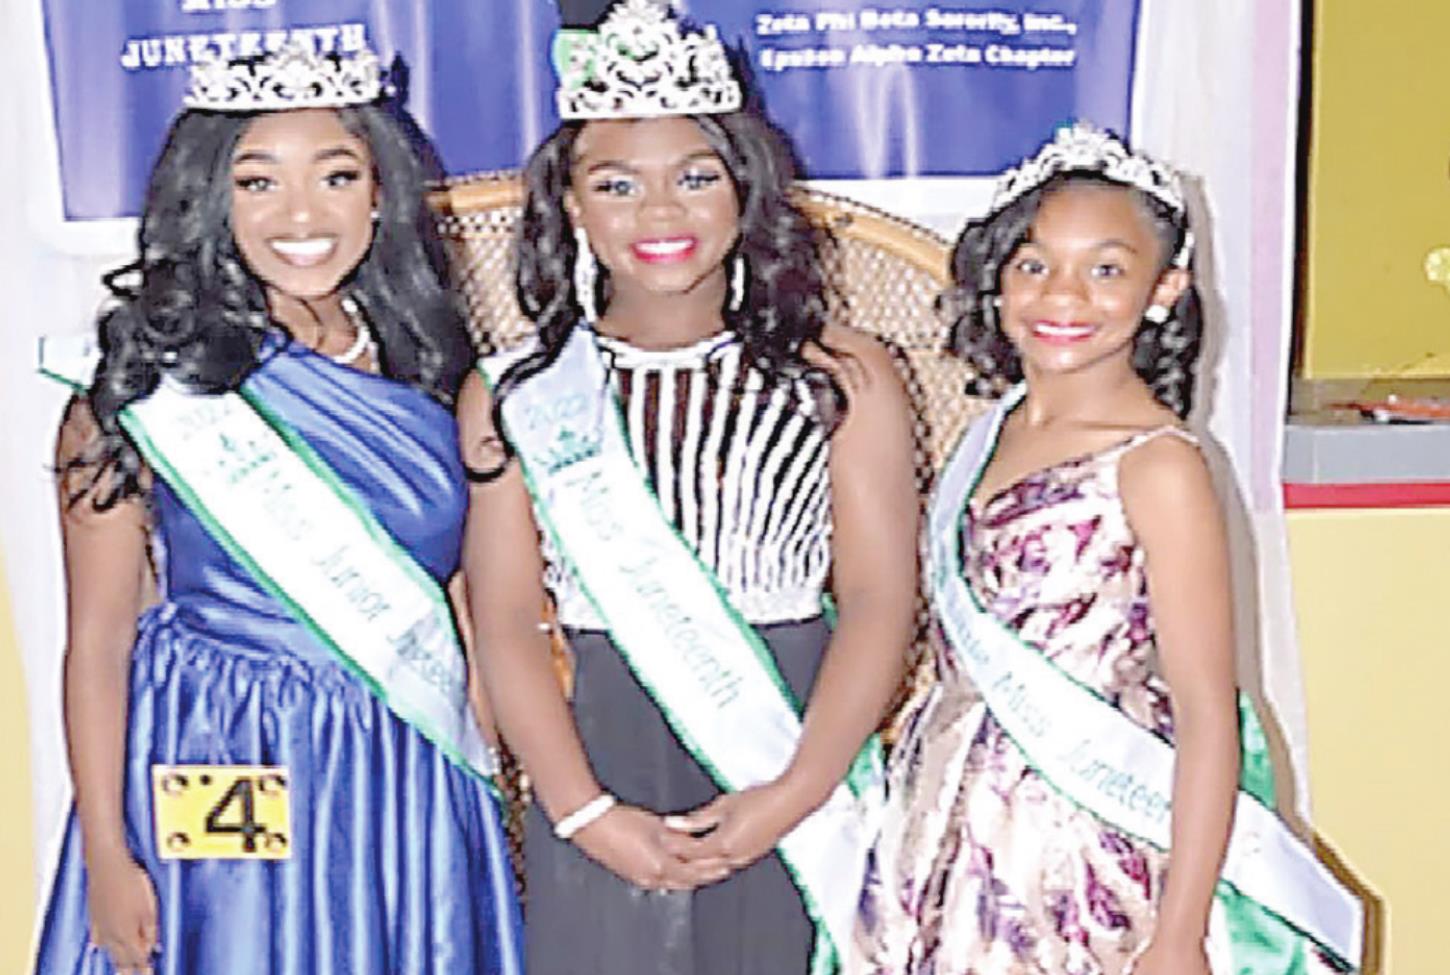 pageant returns to Grambling after twoyear hiatus Ruston